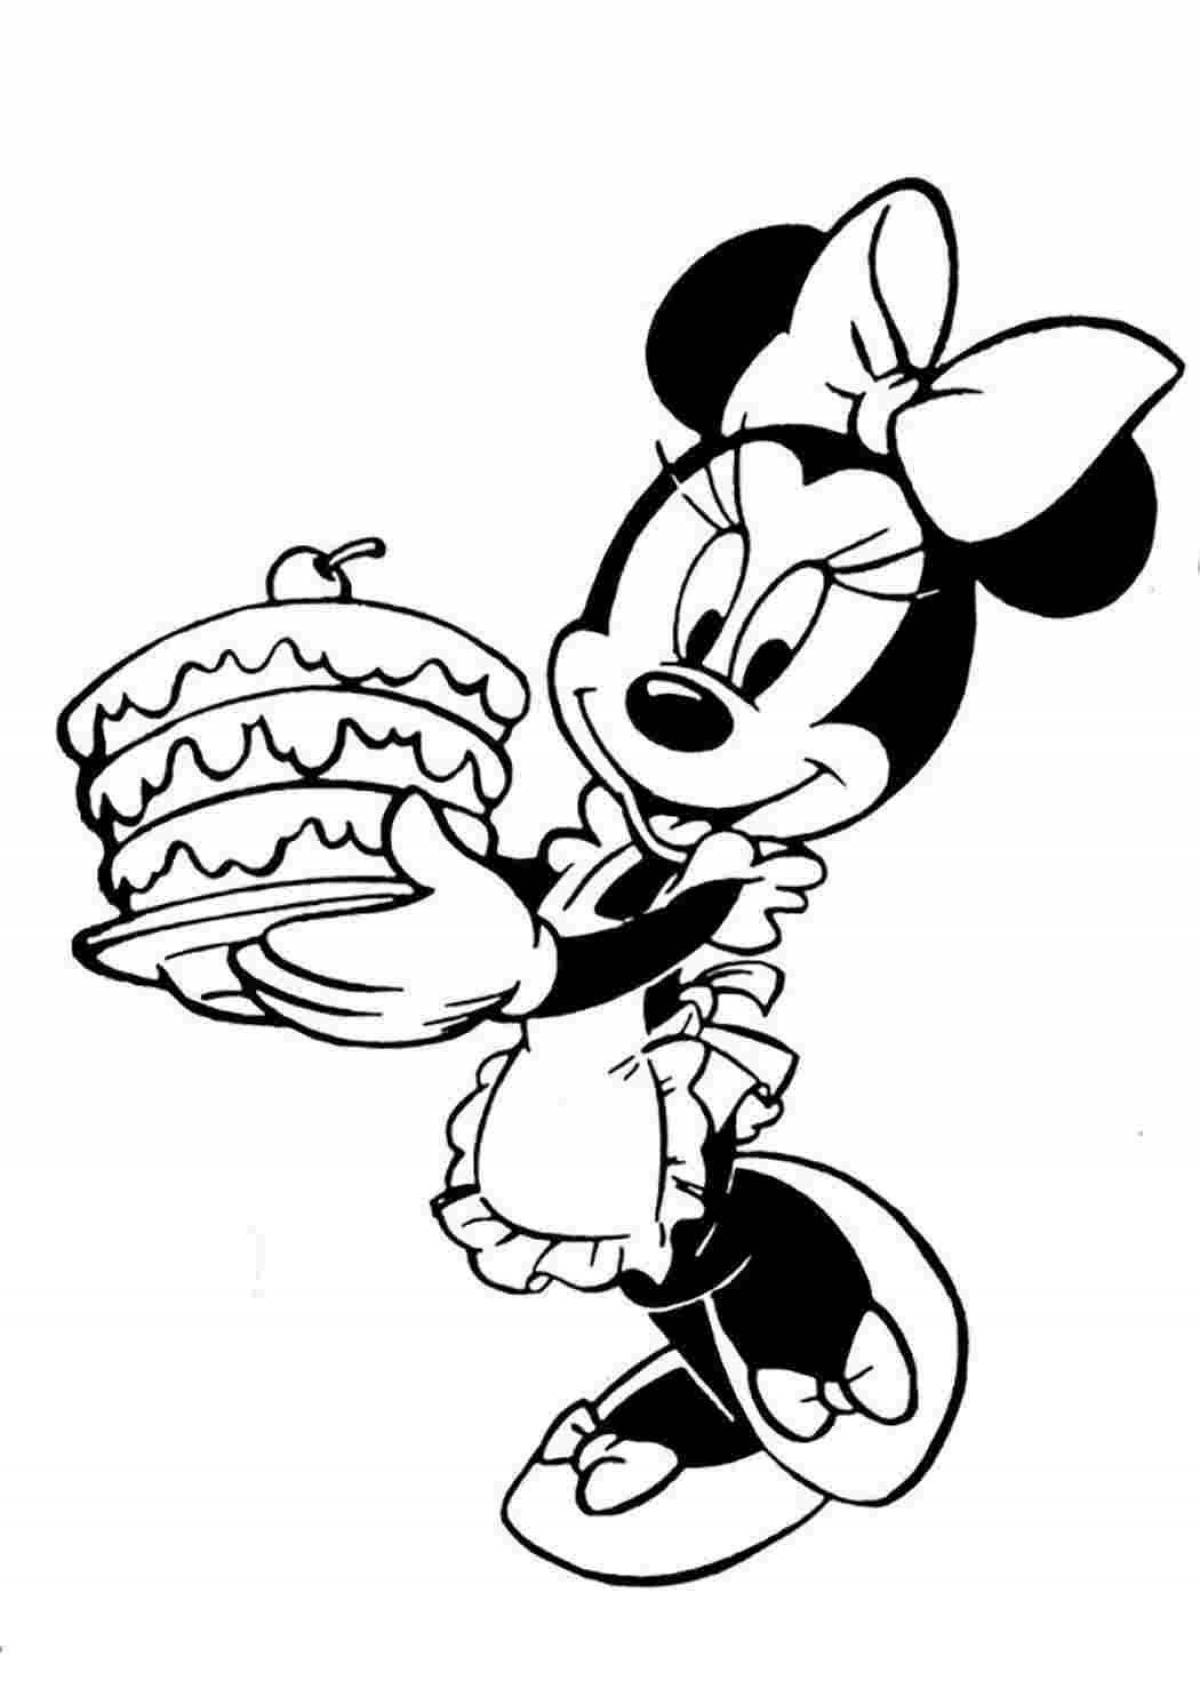 Minnie's happy coloring page